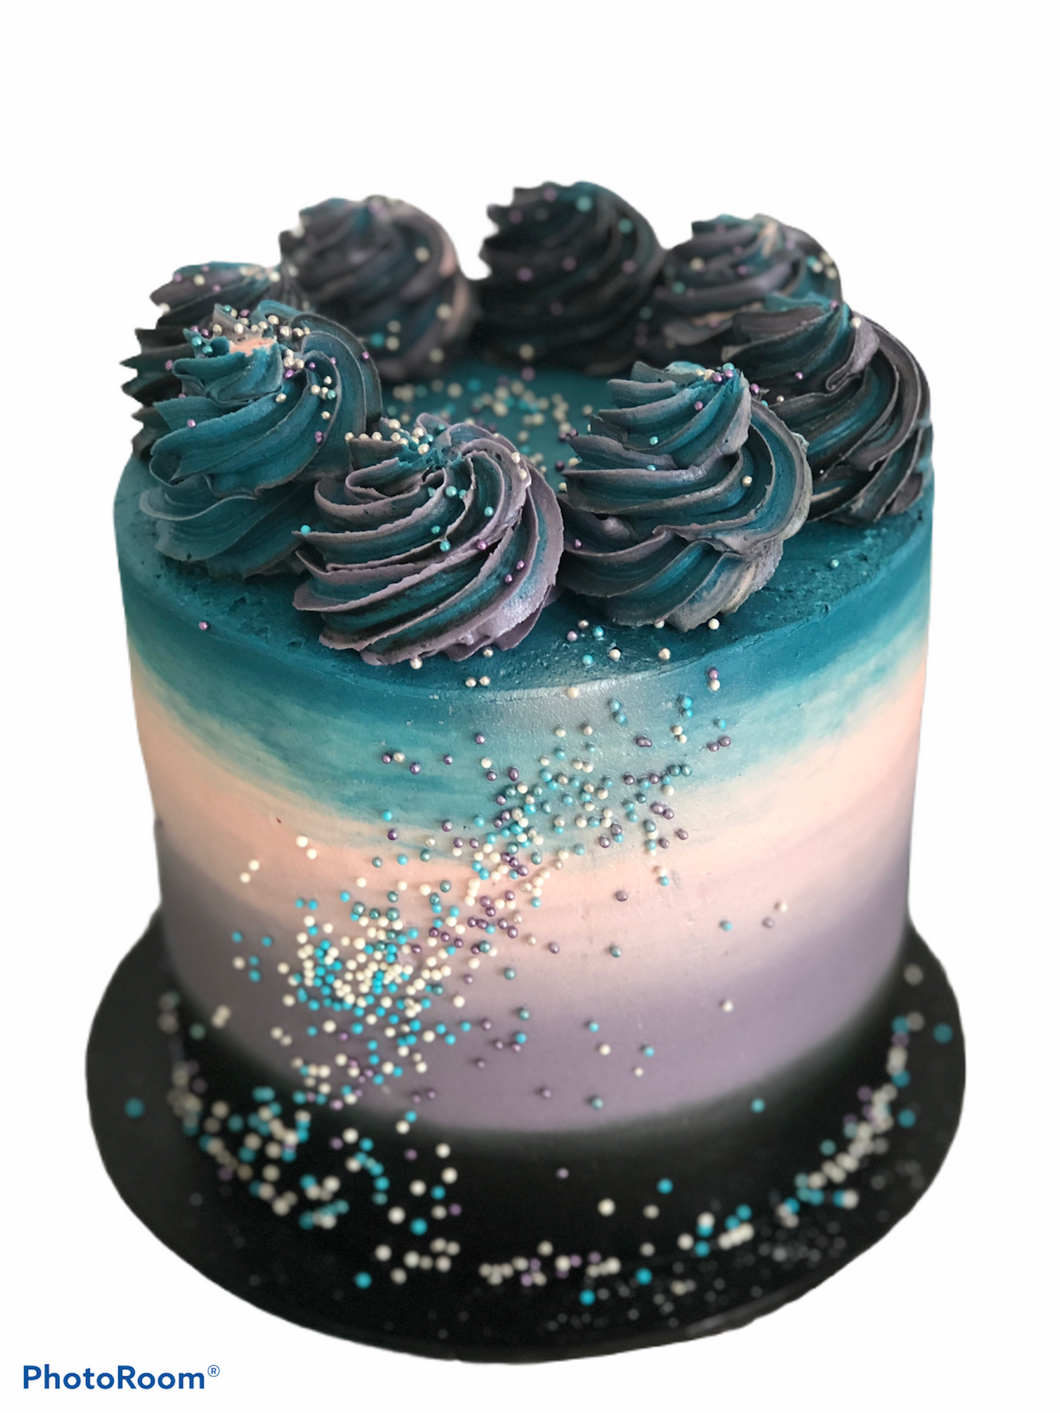 Move over, rainbow cakes! See stunning 'Galaxy cakes' taking over the  internet